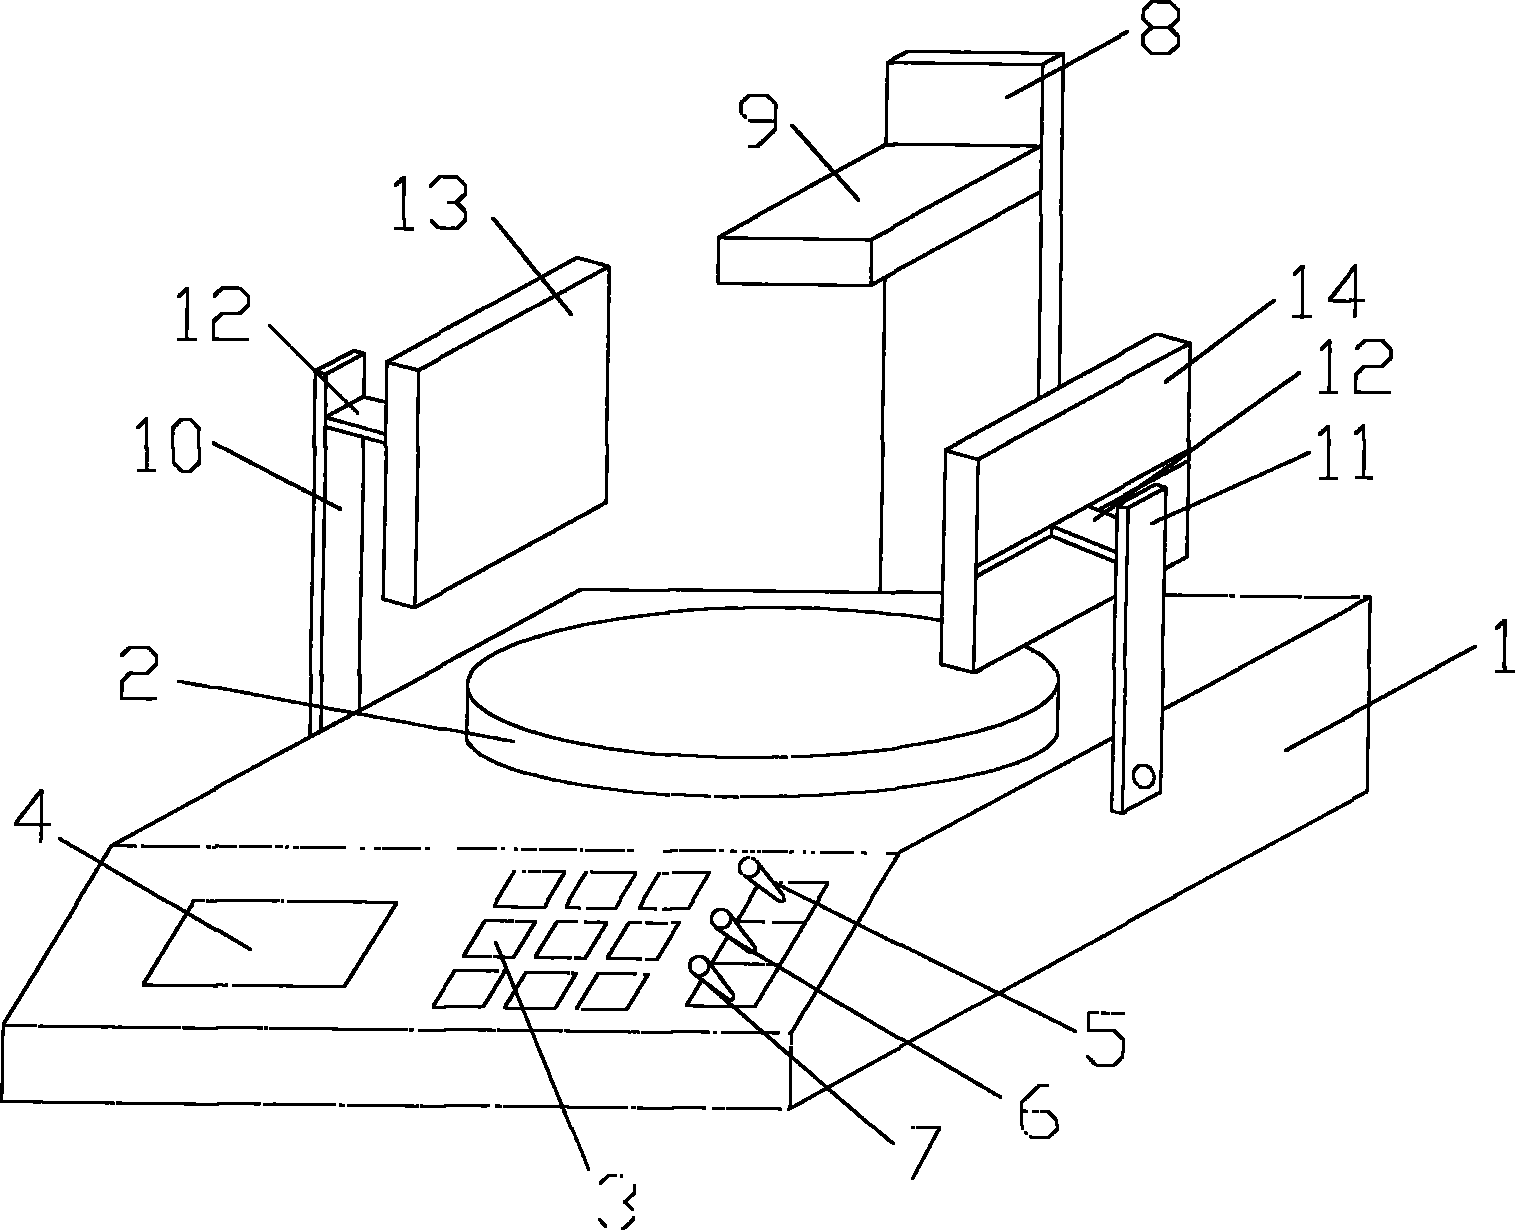 Electronic balance capable of measuring size of object